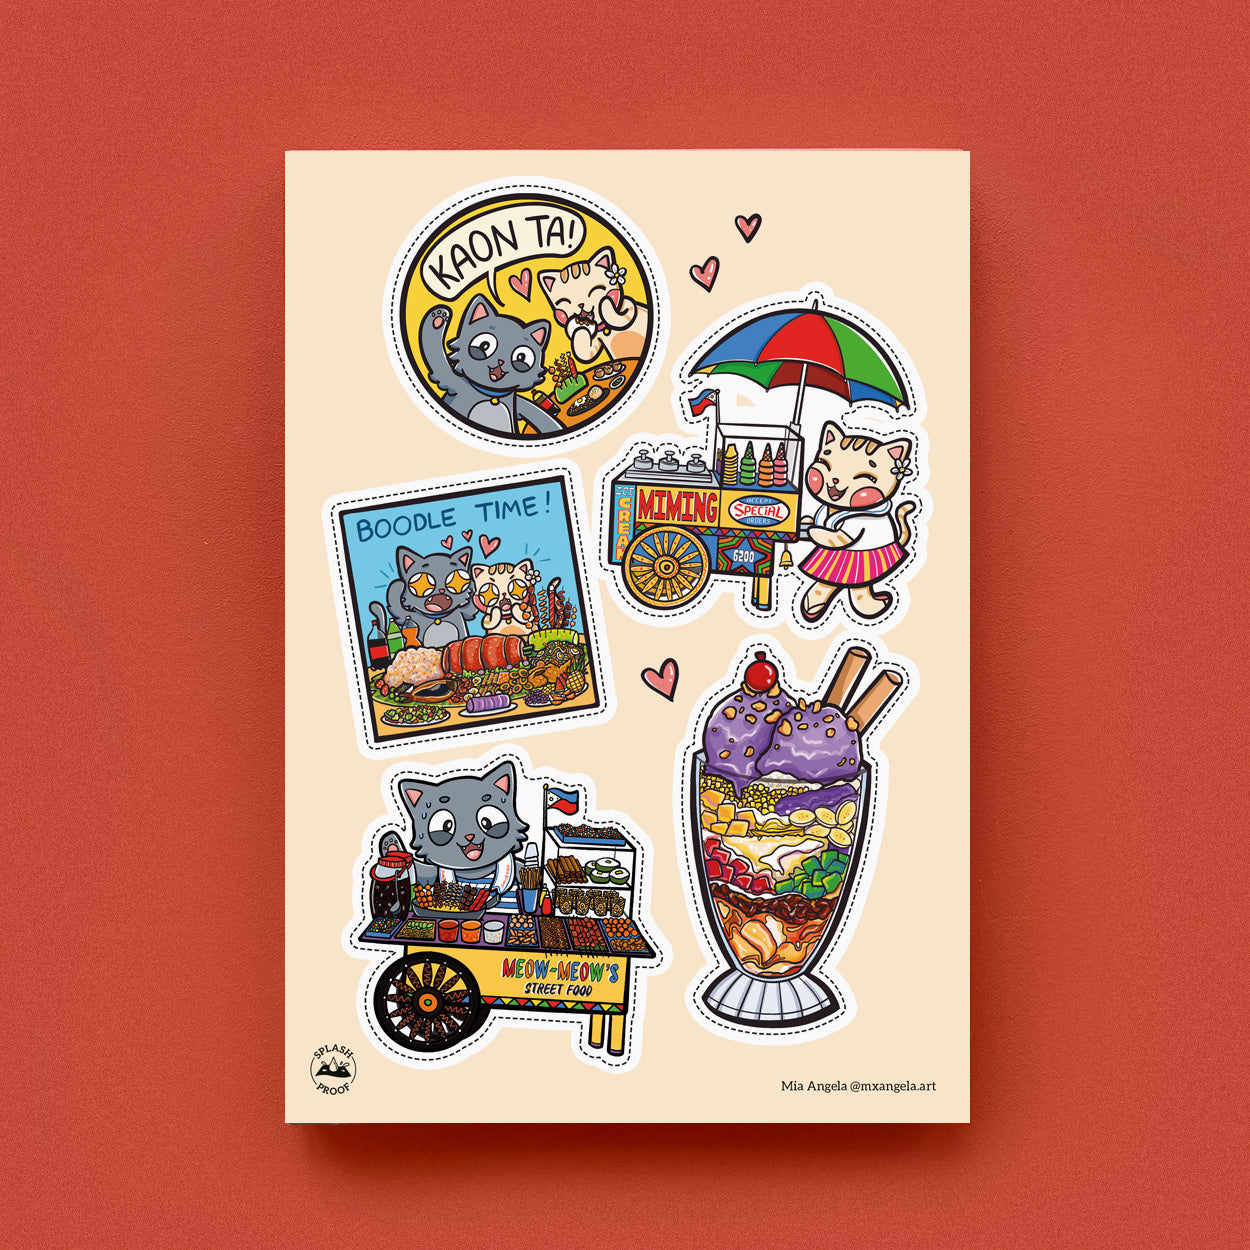 Gentle People Dumaguete City artist art craft book stickers sticker cute creative gift souvenir solution travel tourism Belfry tricycle Cil Flores sticker page journal journaling scrapbooking hobby art collector Dumaguete city exhibition Mia Angela